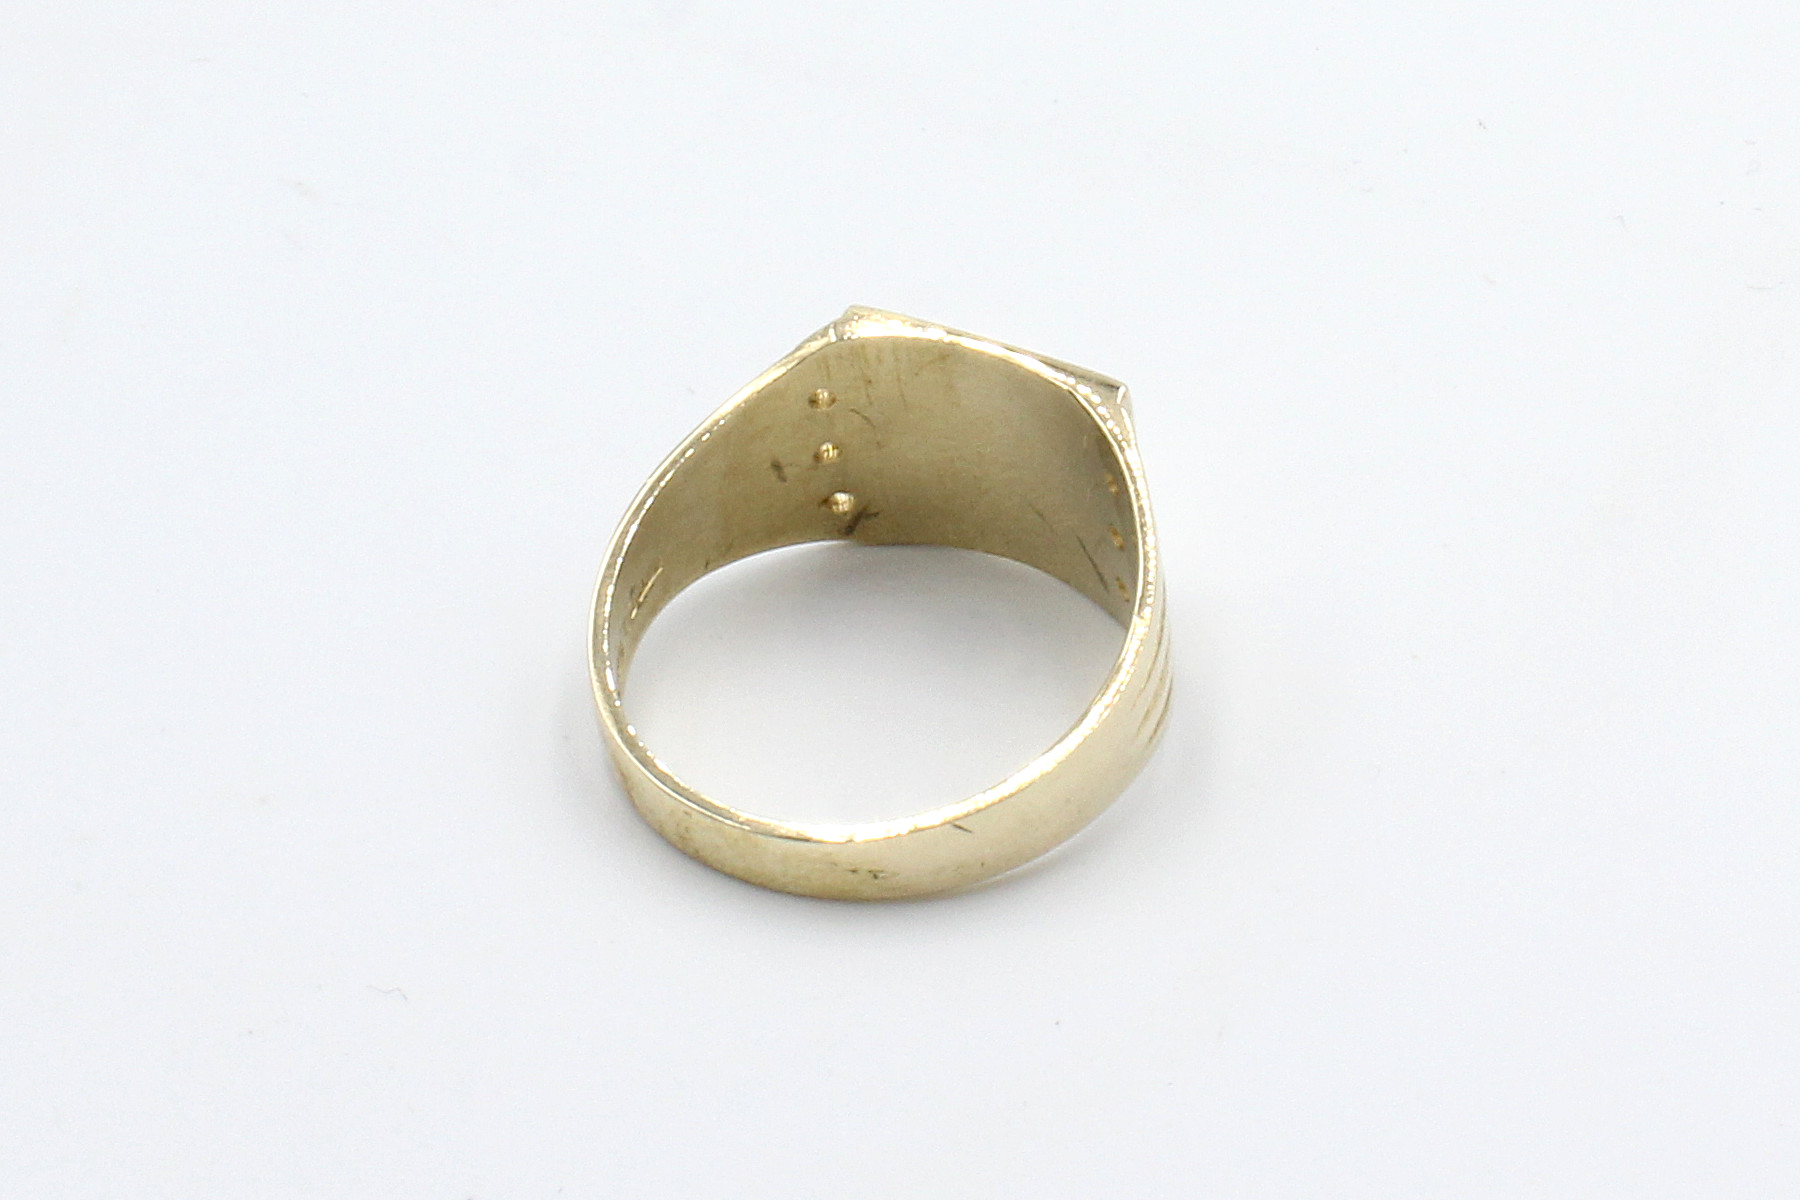 rear view of a plain gold signet ring